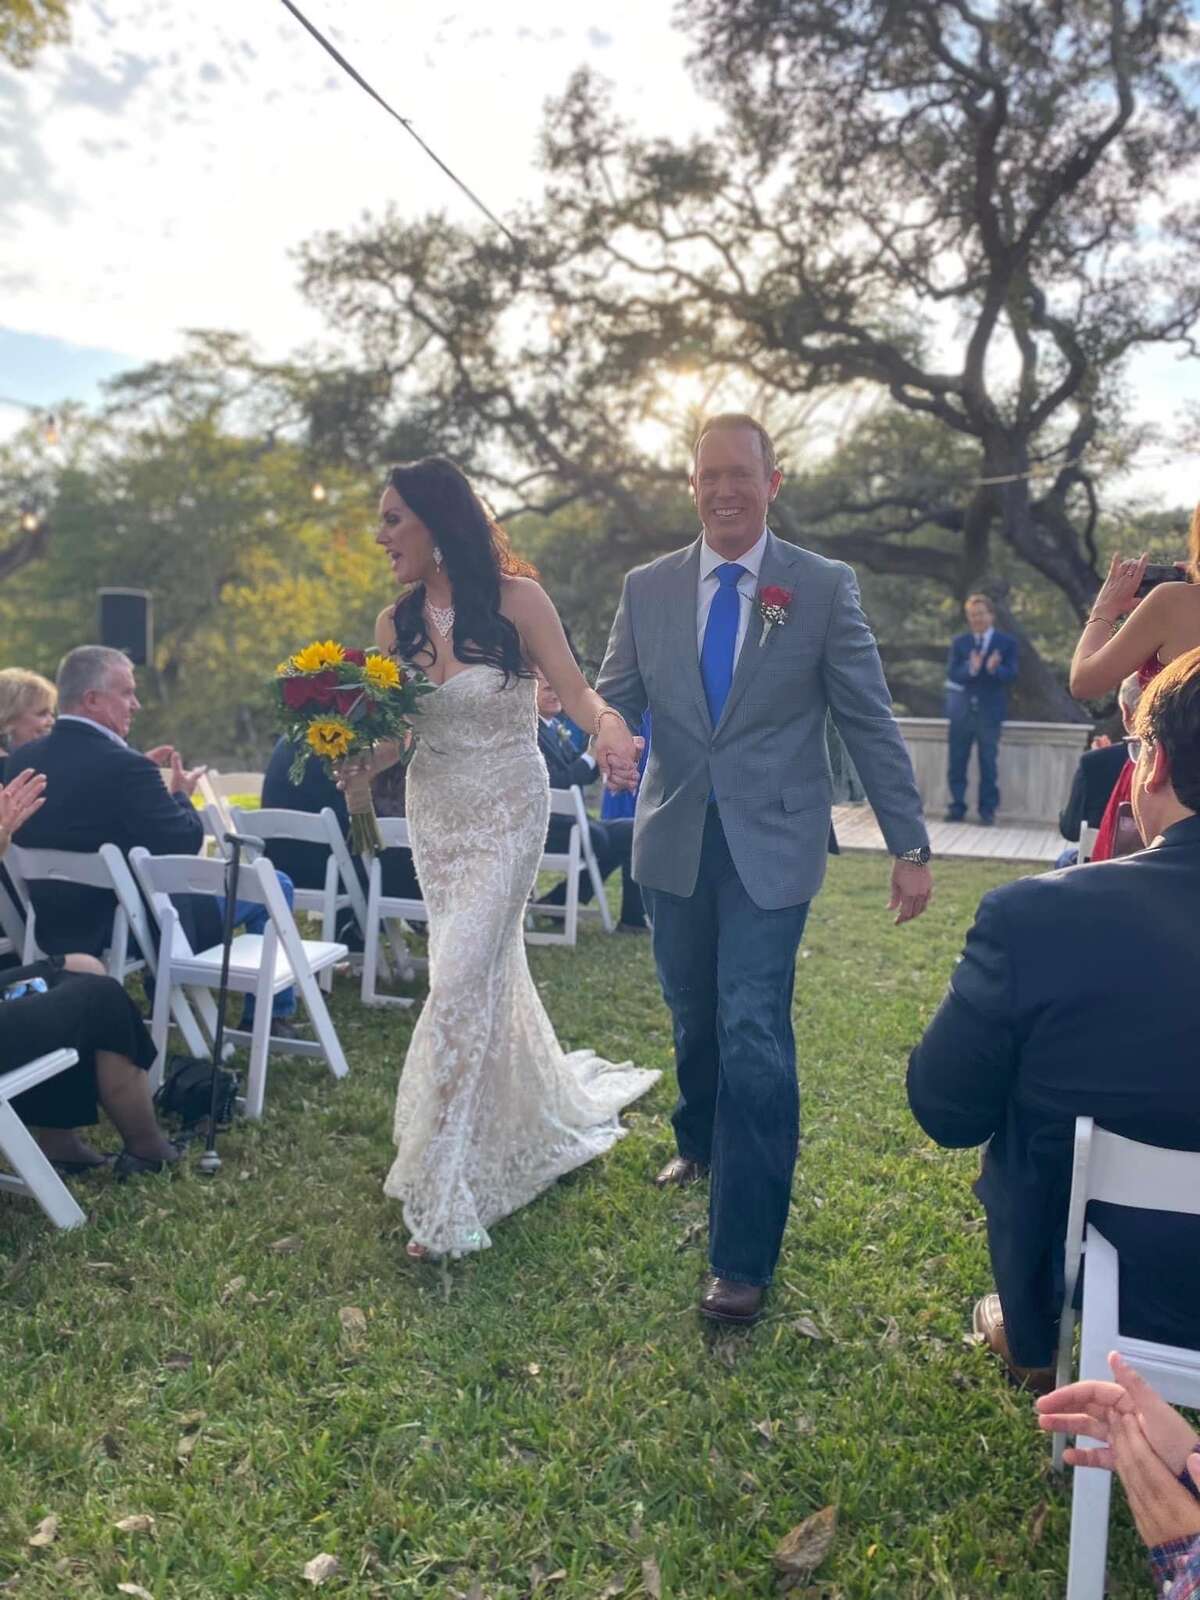 News 4 Chief Meteorologist Chris Suchan marries wife Amber in intimate Hill Country wedding.